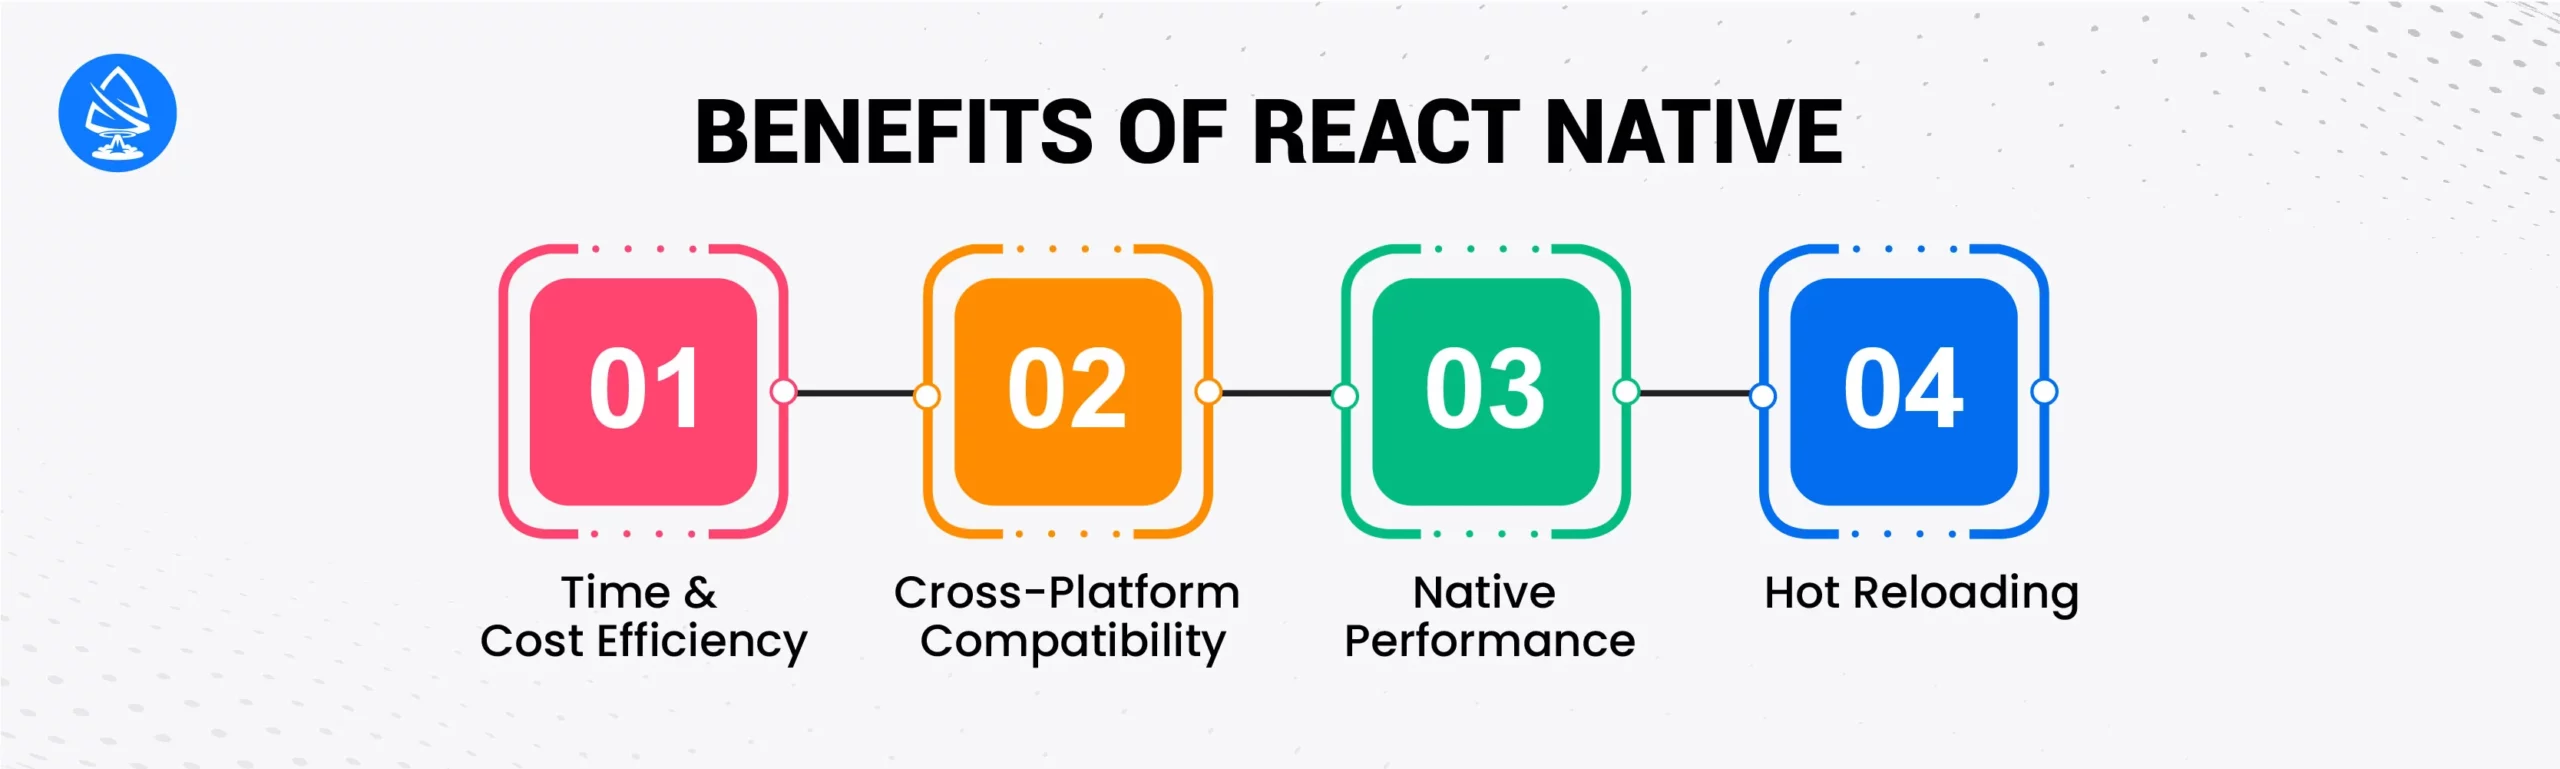 Benefits of React Native for Developing Mobile App